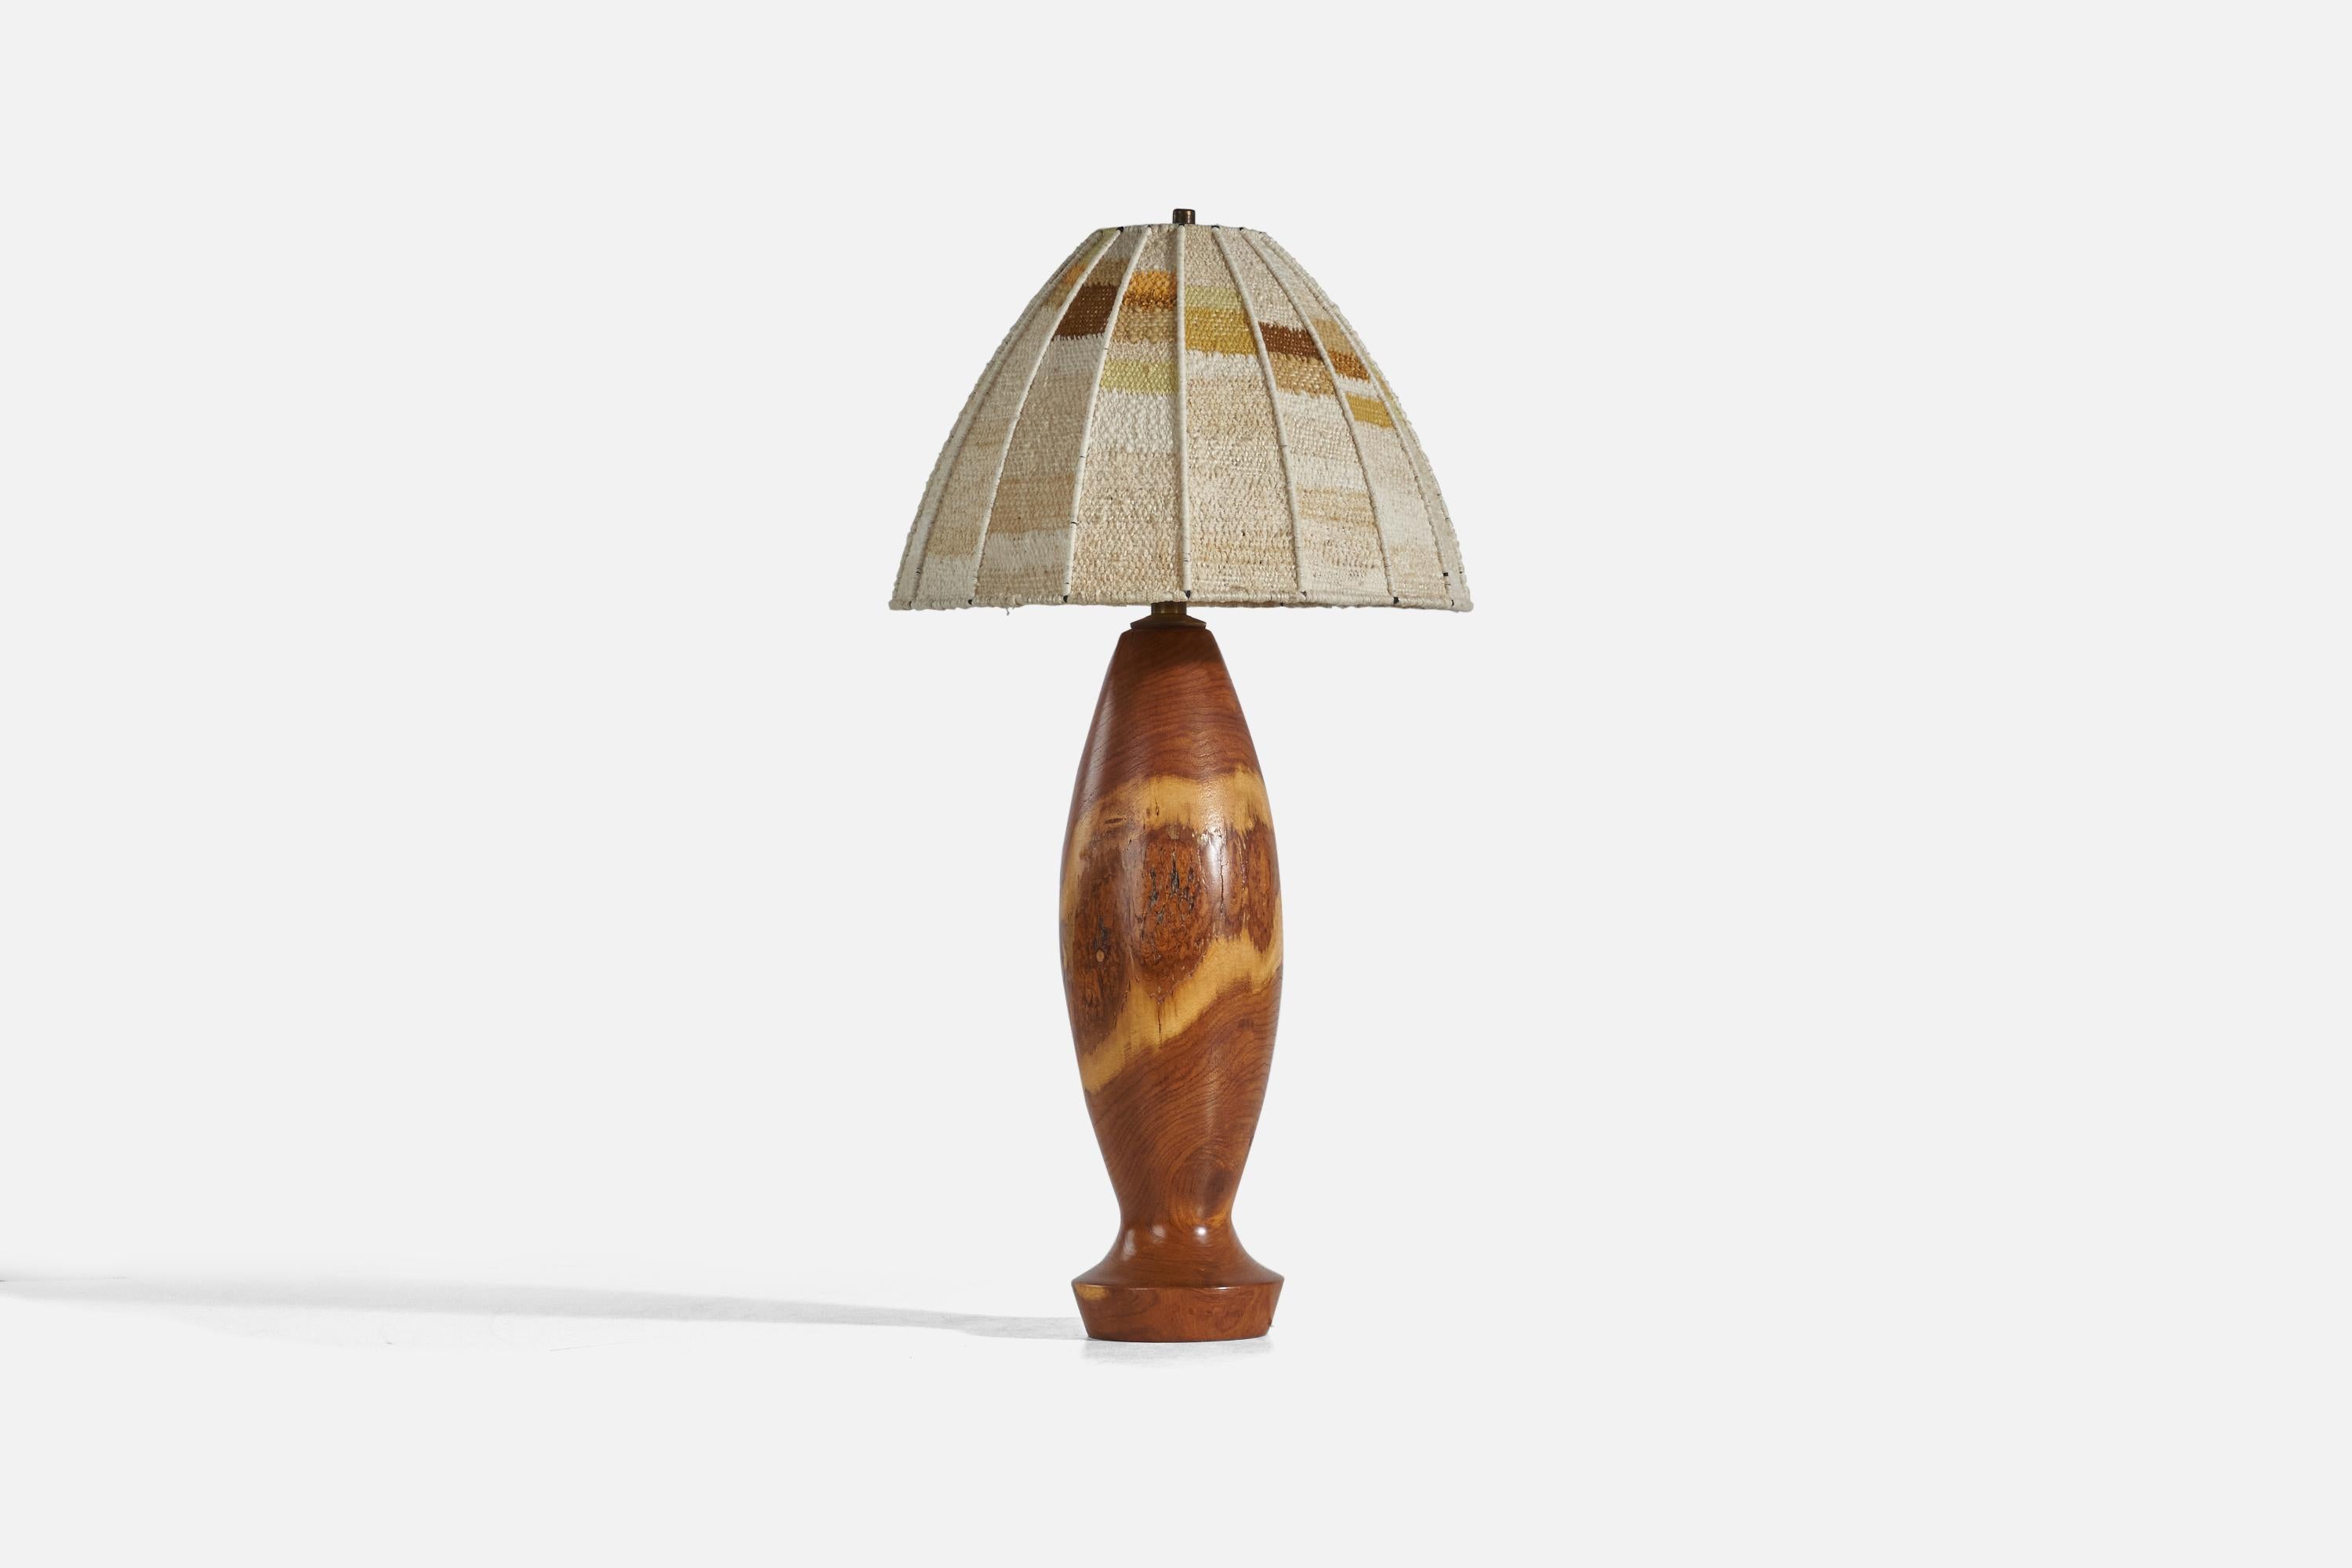 A wood and fabric table lamp designed and produced in the United States, c. 1950s. With its original handwoven lampshade.

Sold with Lampshade. Dimensions stated are of Table Lamp with Lampshade. 

Socket takes standard E-26 medium base bulb.

There